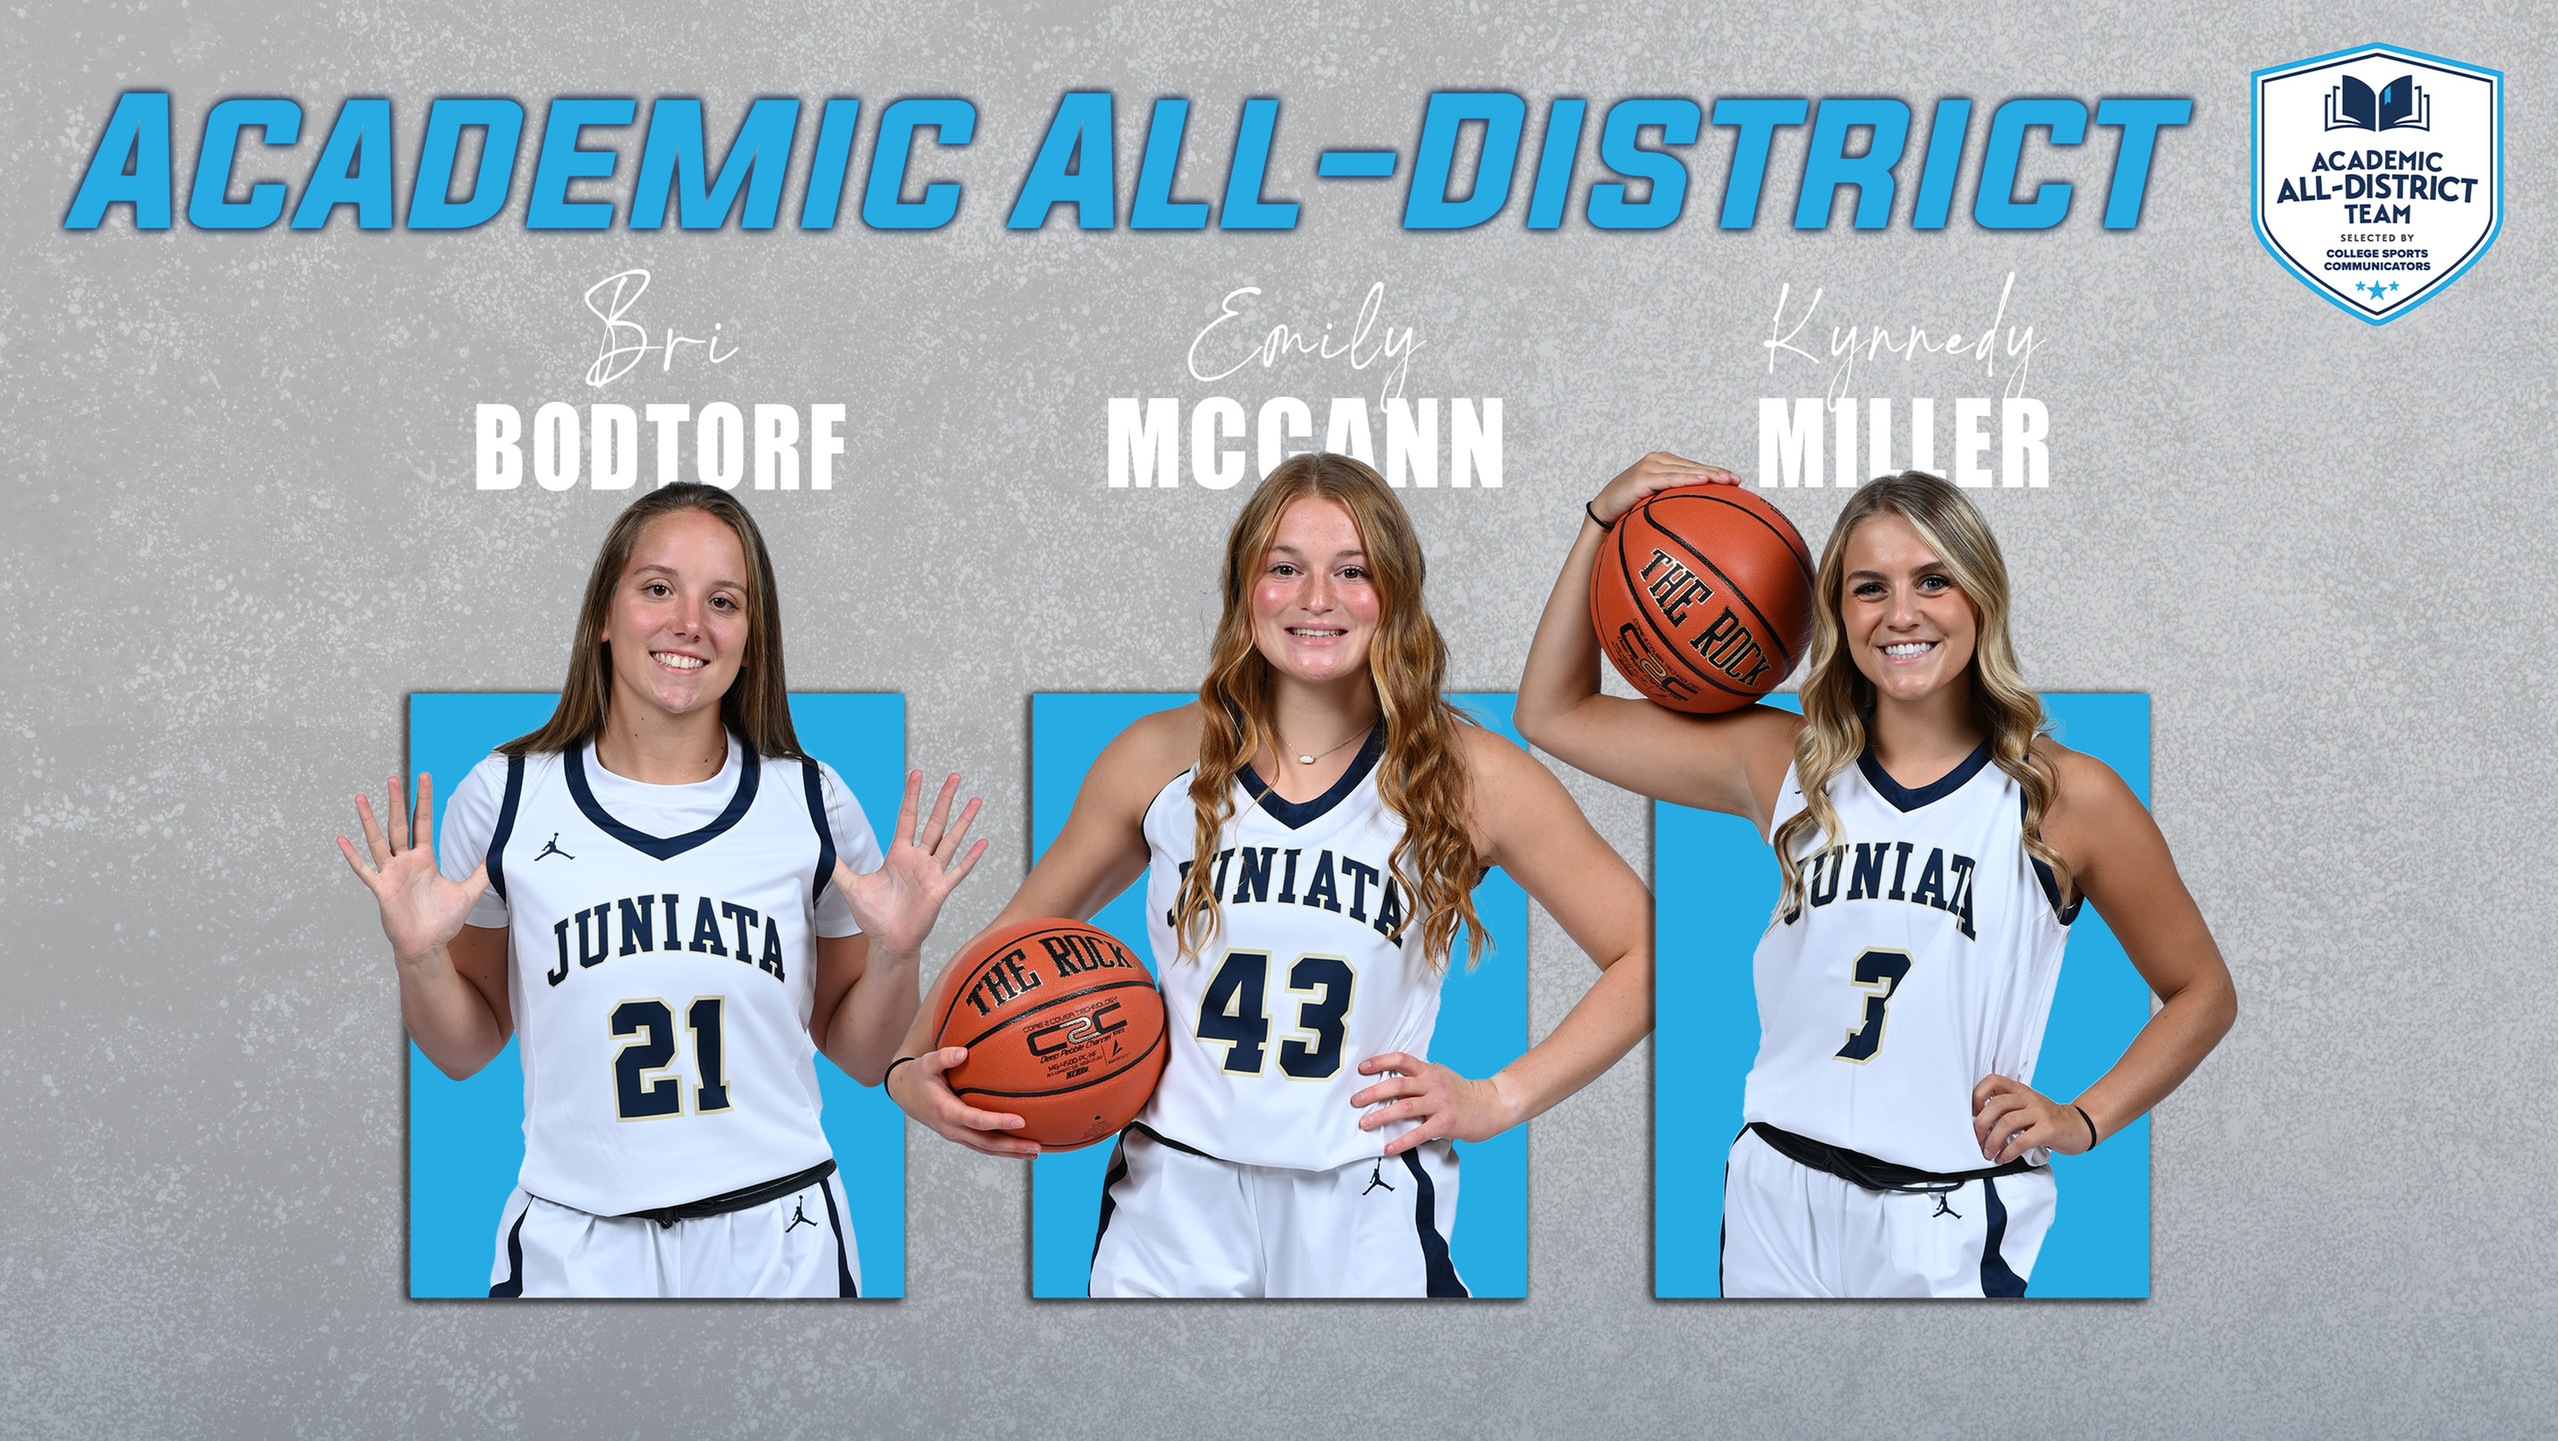 Bodtorf, McCann, and Miller Named to CSC Academic All-District® Women's Basketball Team